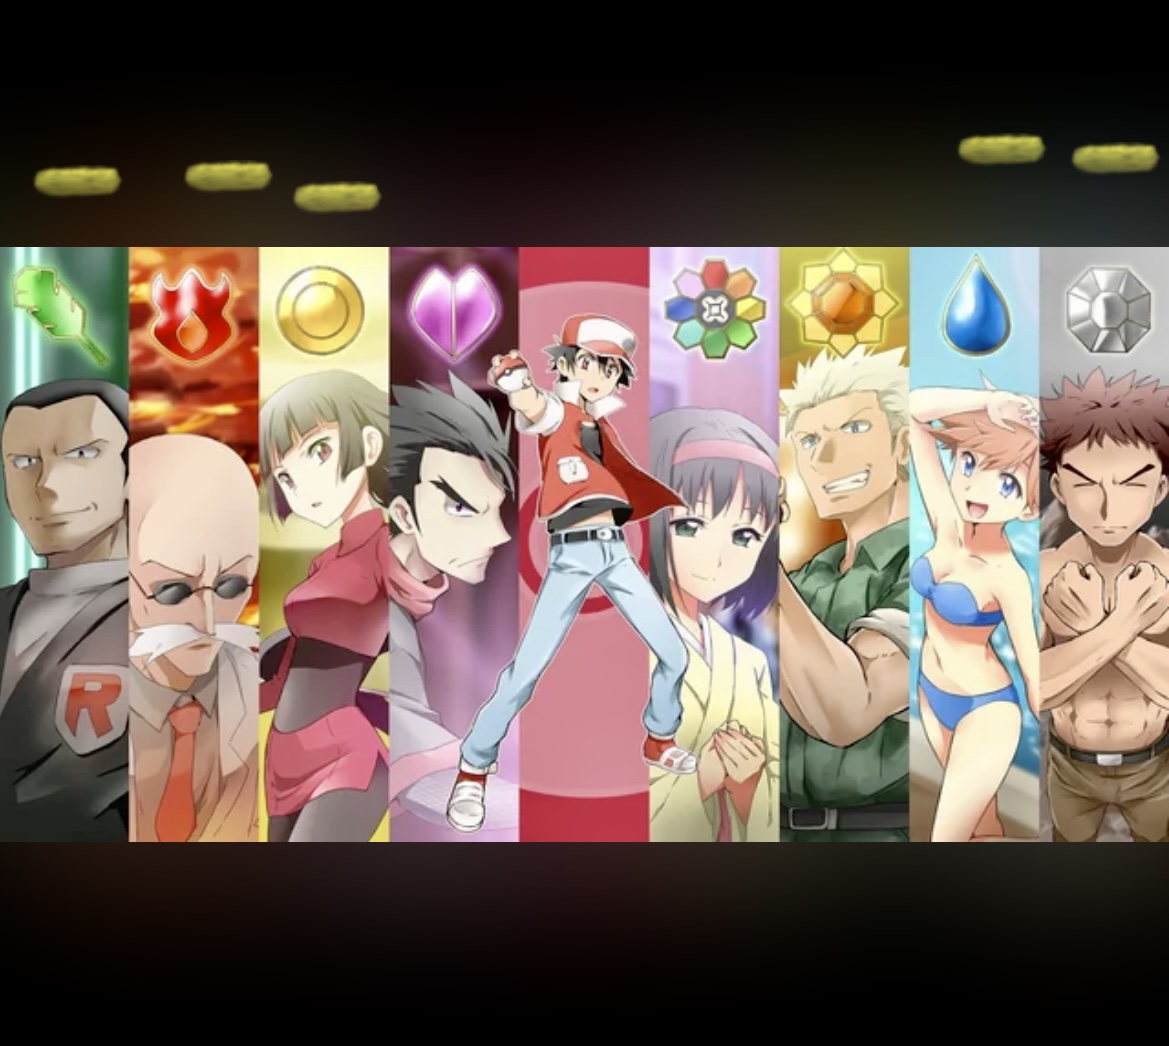 My Favorite Gym Leaders/Elite Four/Champion for Each Type: